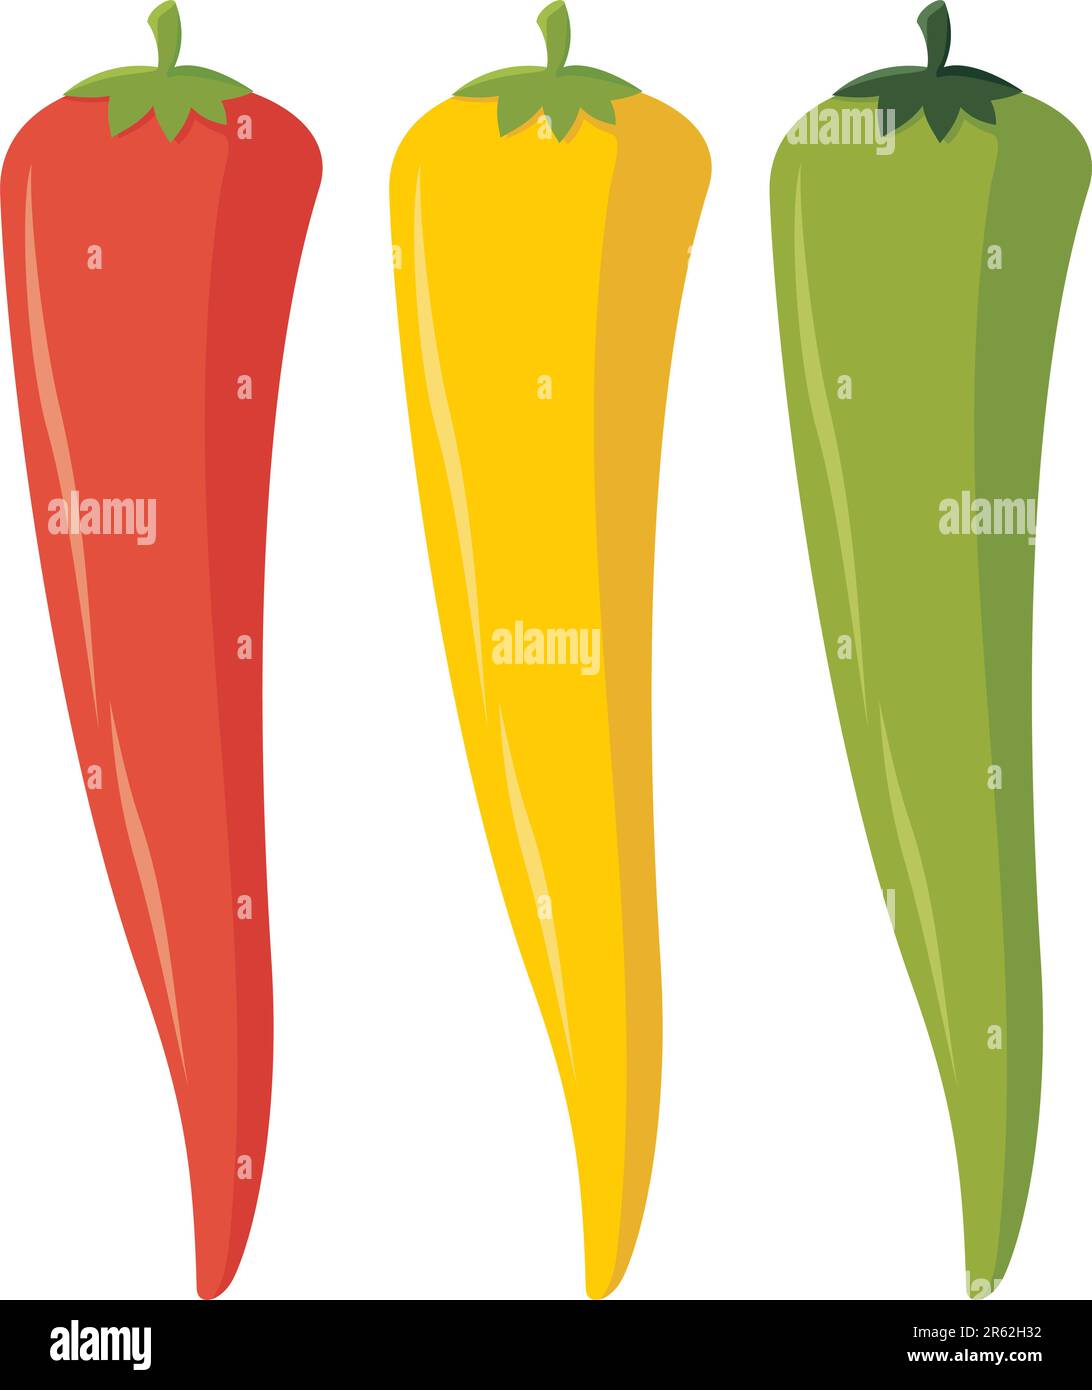 Illustration of three chili peppers in assorted colors Stock Vector